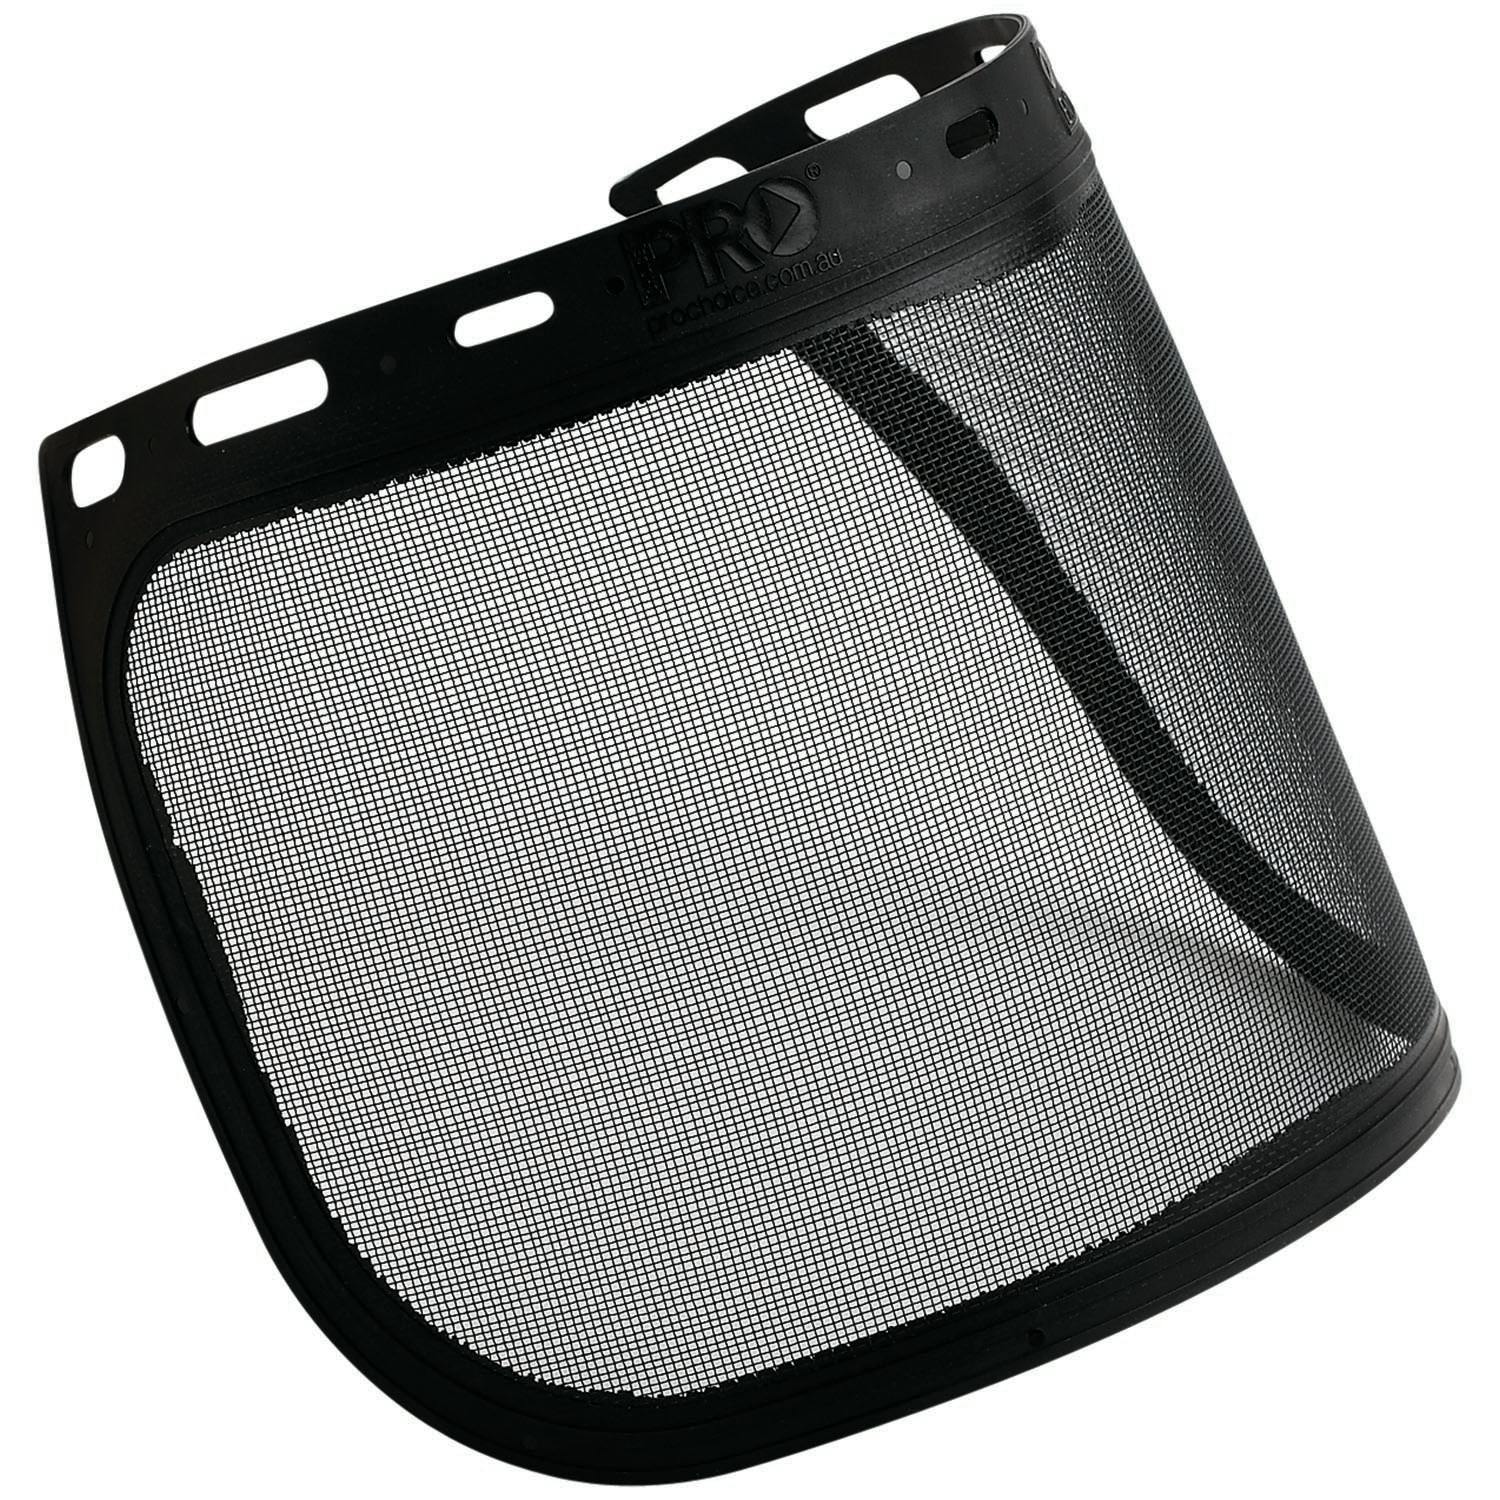 Pro Choice Striker Visor To Suit Pro Choice Safety Gear Browguards (Bg & Hhbge) Mesh Lens